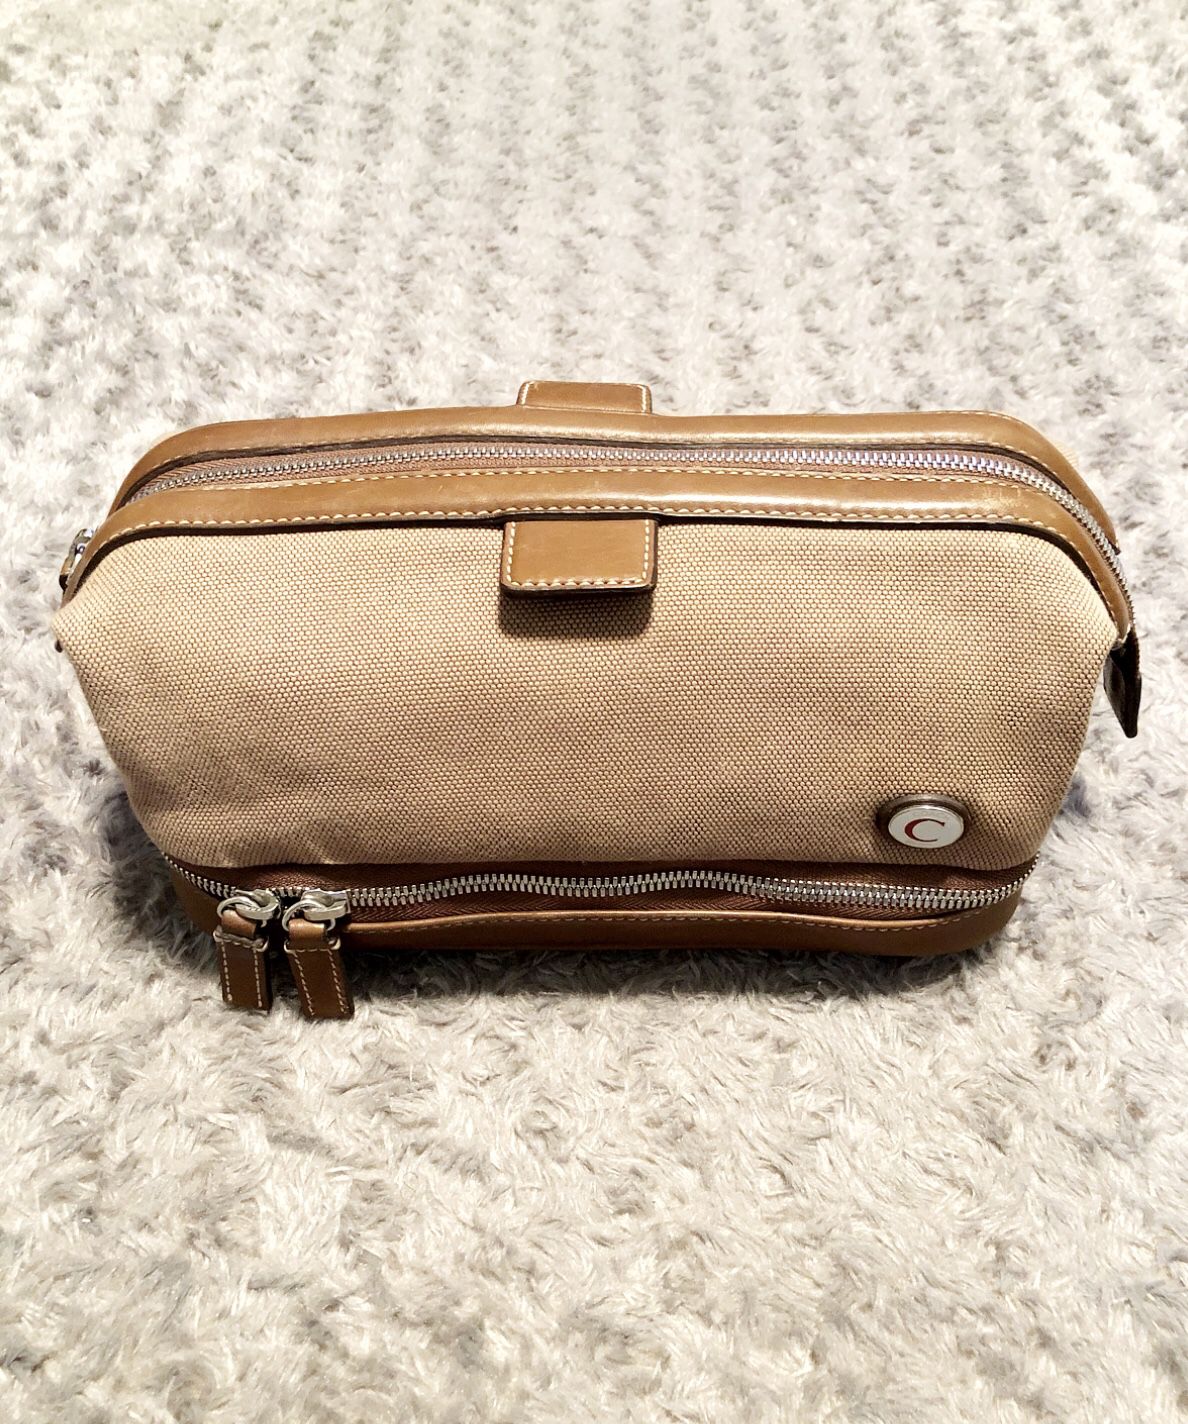 Men’s Coach toiletry bag paid $125 great condition No. E3L-5044 very nice travel bag with lot of storage space! Classic must have for men.